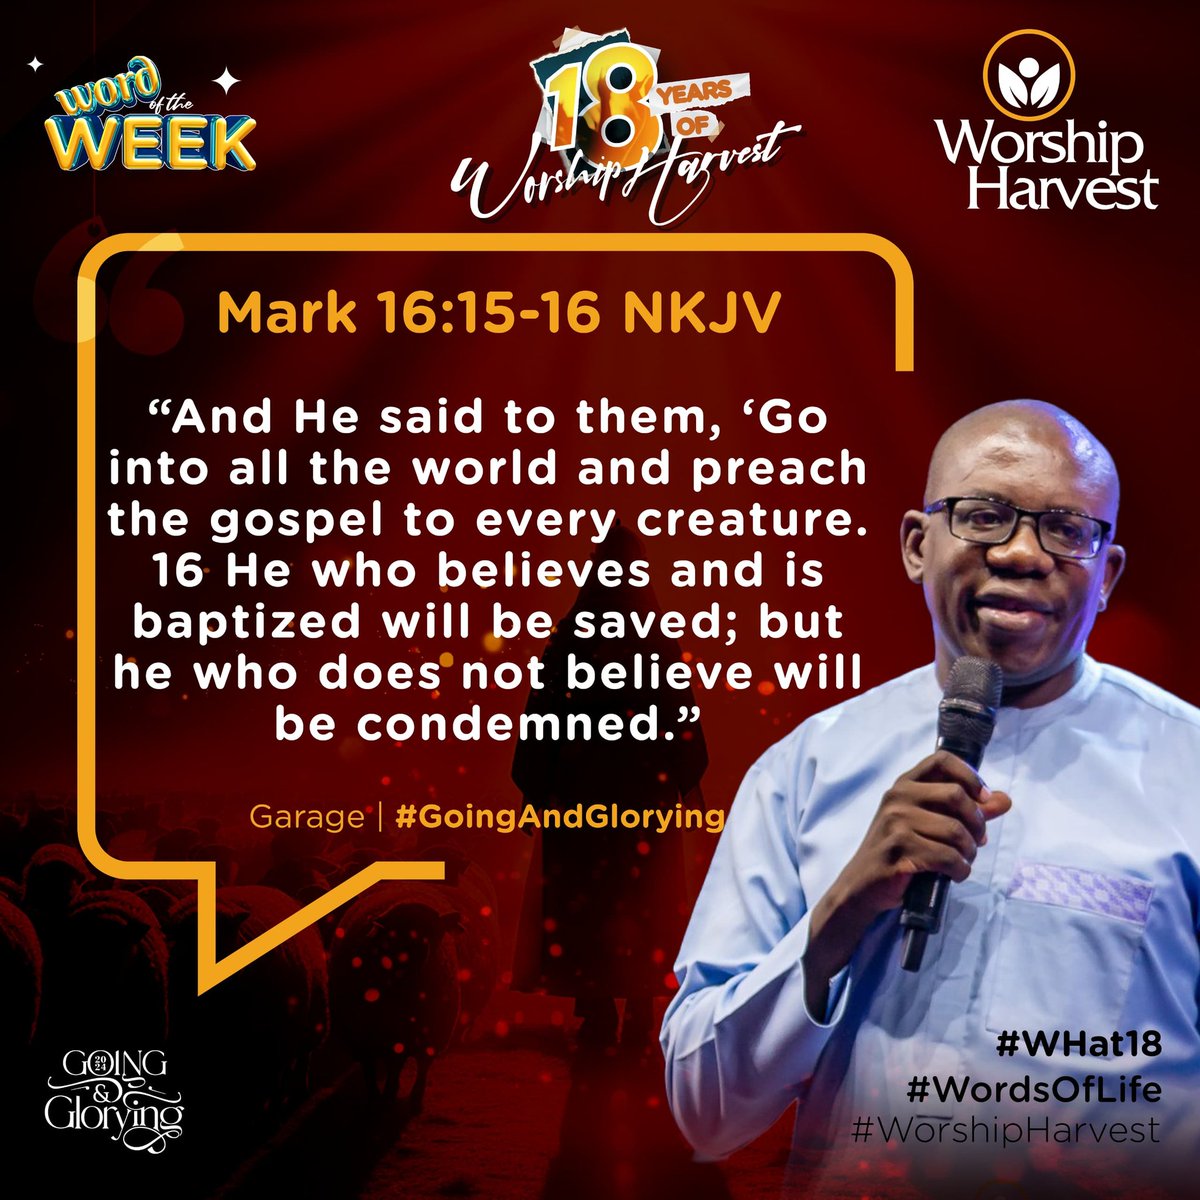 We must have a Mega Church because our harvest field is the world. As you start the new week, remember to go out and win more souls for the glory of the Lord.

Happy New Week! 😊

#WHat18 #WordsOfLife 
#WorshipHarvest #GoingAngGlorying